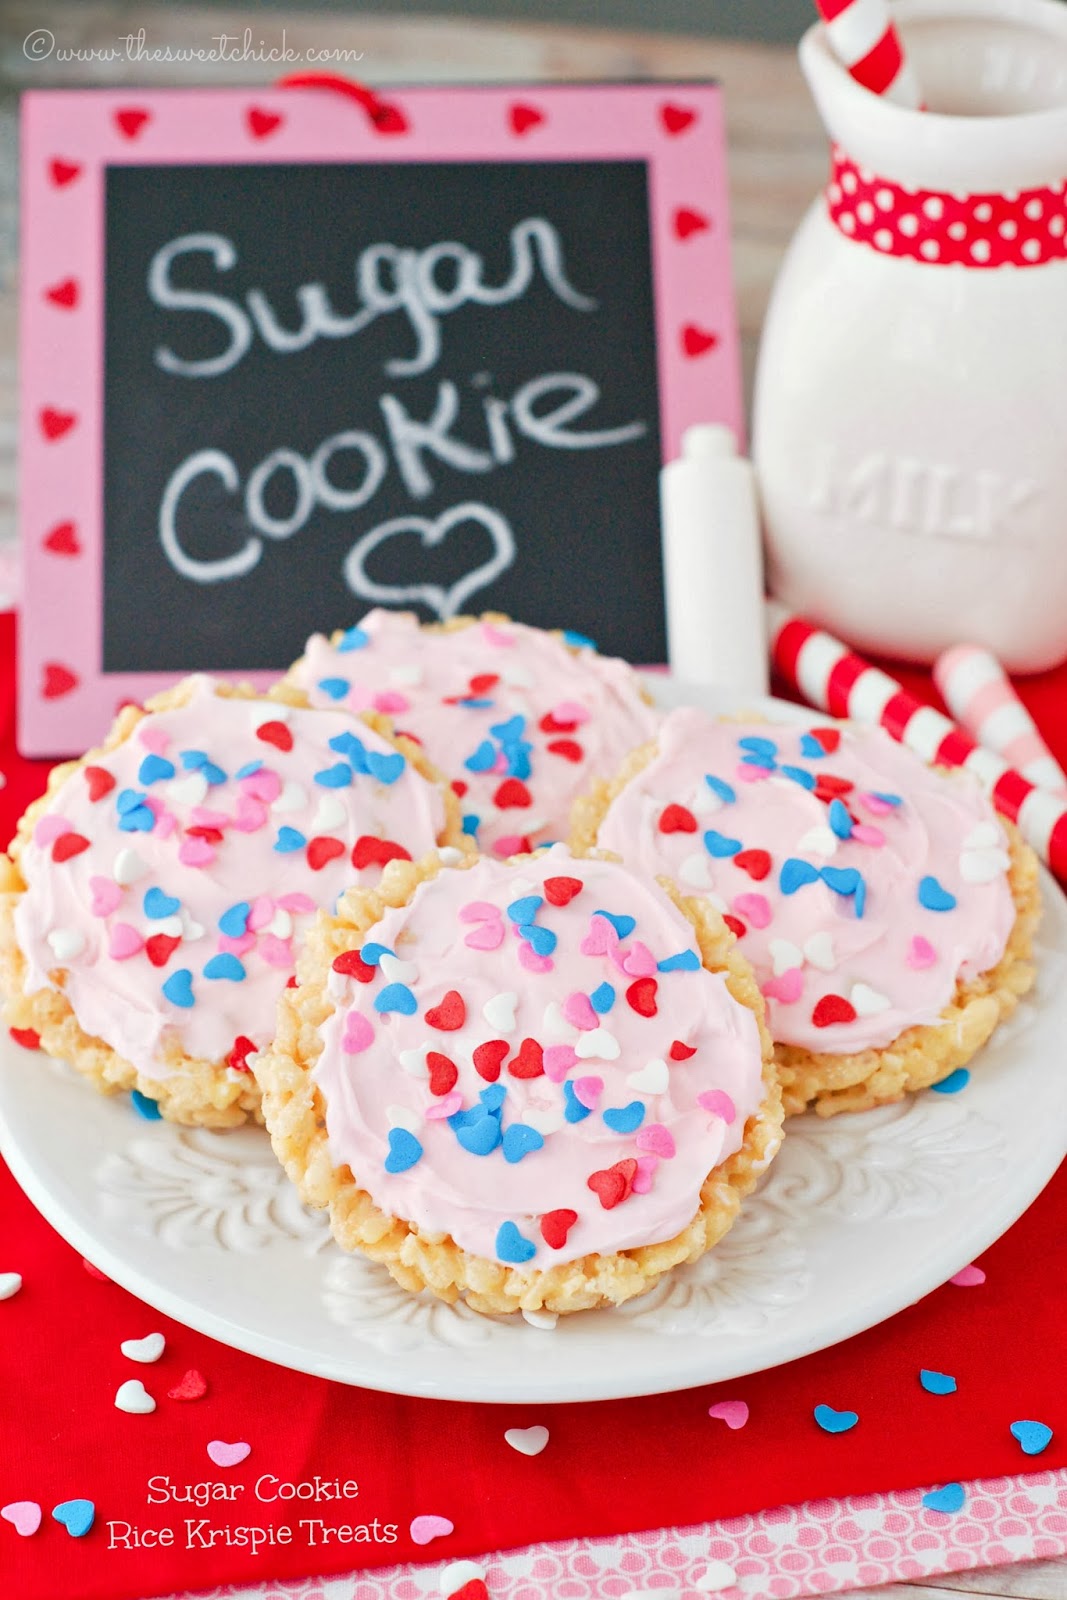 Sugar Cookie Rice Krispie Treats by The Sweet Chick